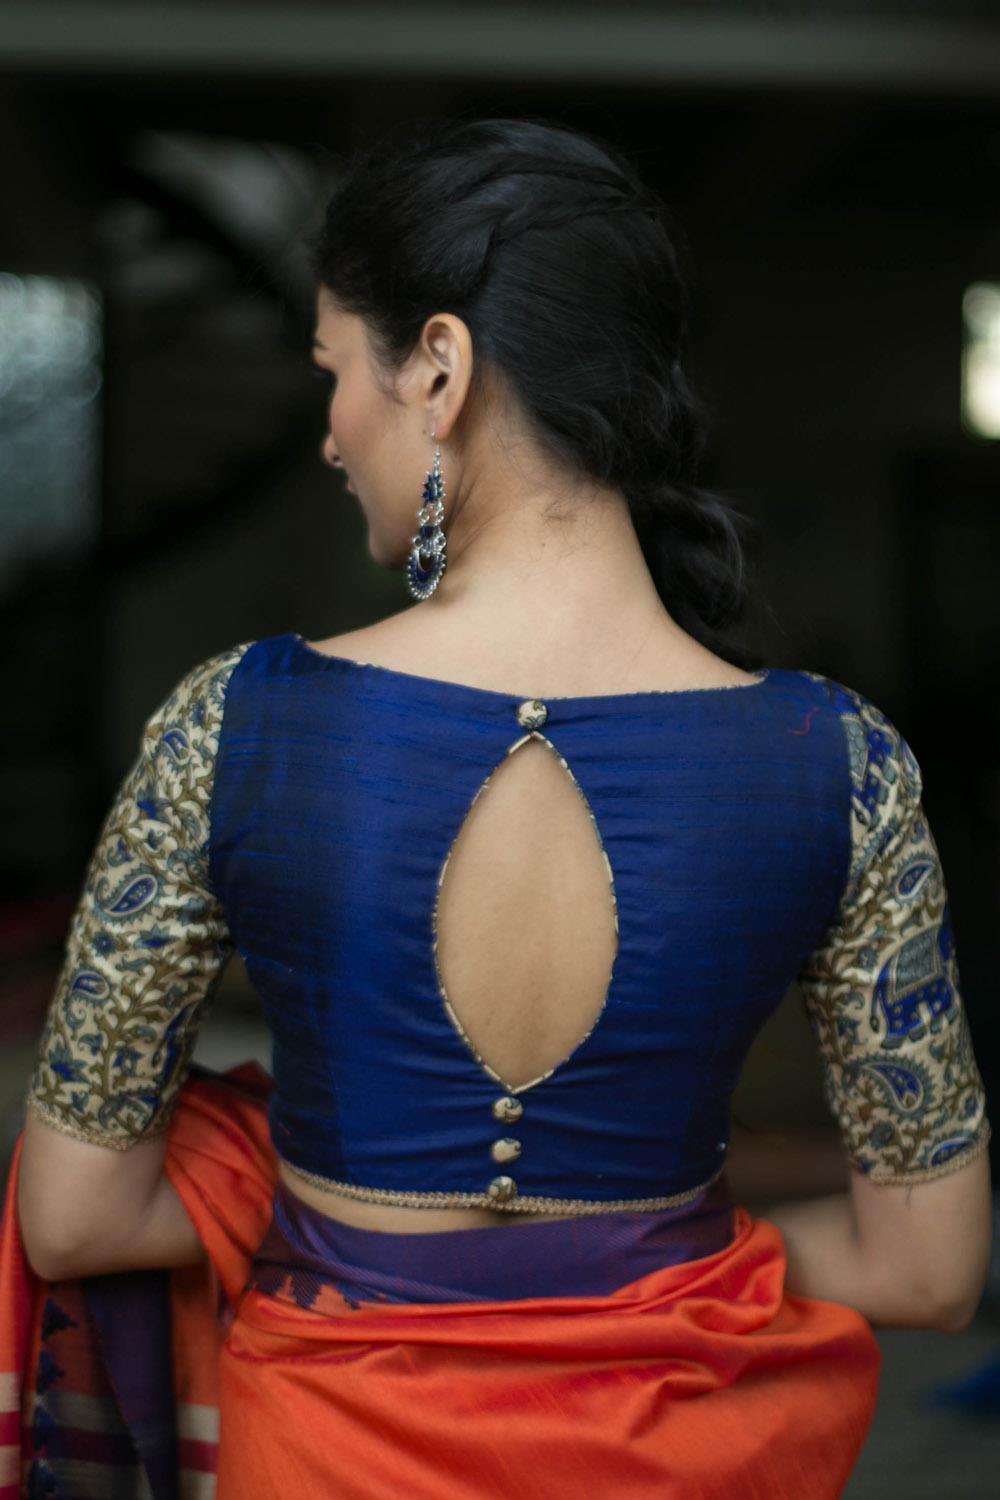 10 New High Neck Blouse Designs For Diwali - Candy Crow